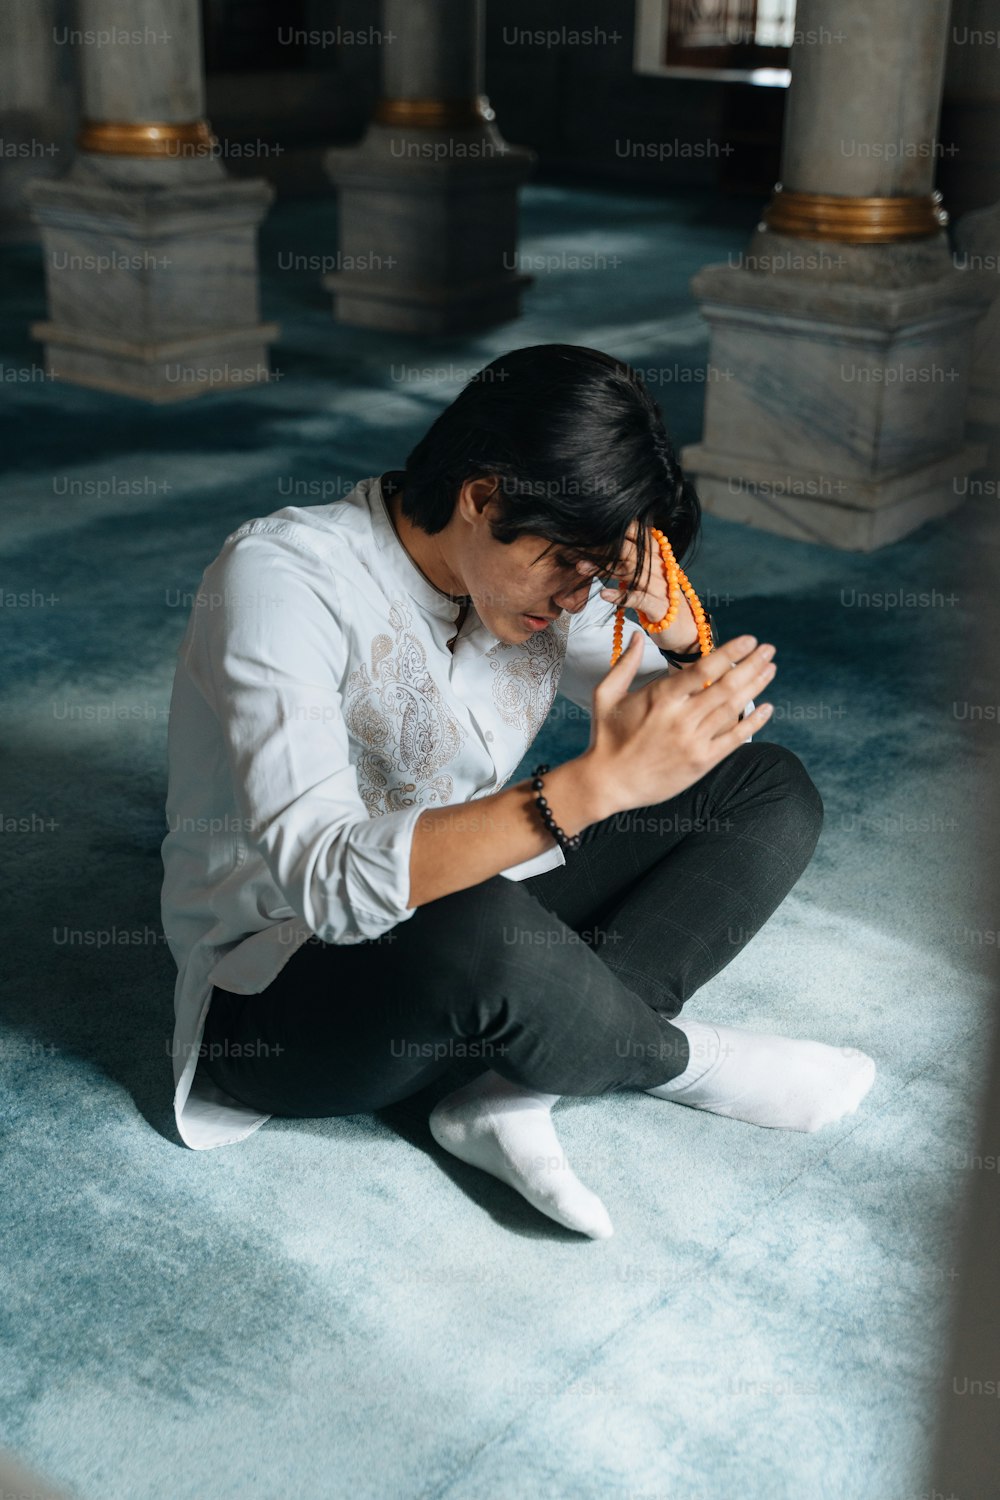 a man sitting on the floor holding a cell phone